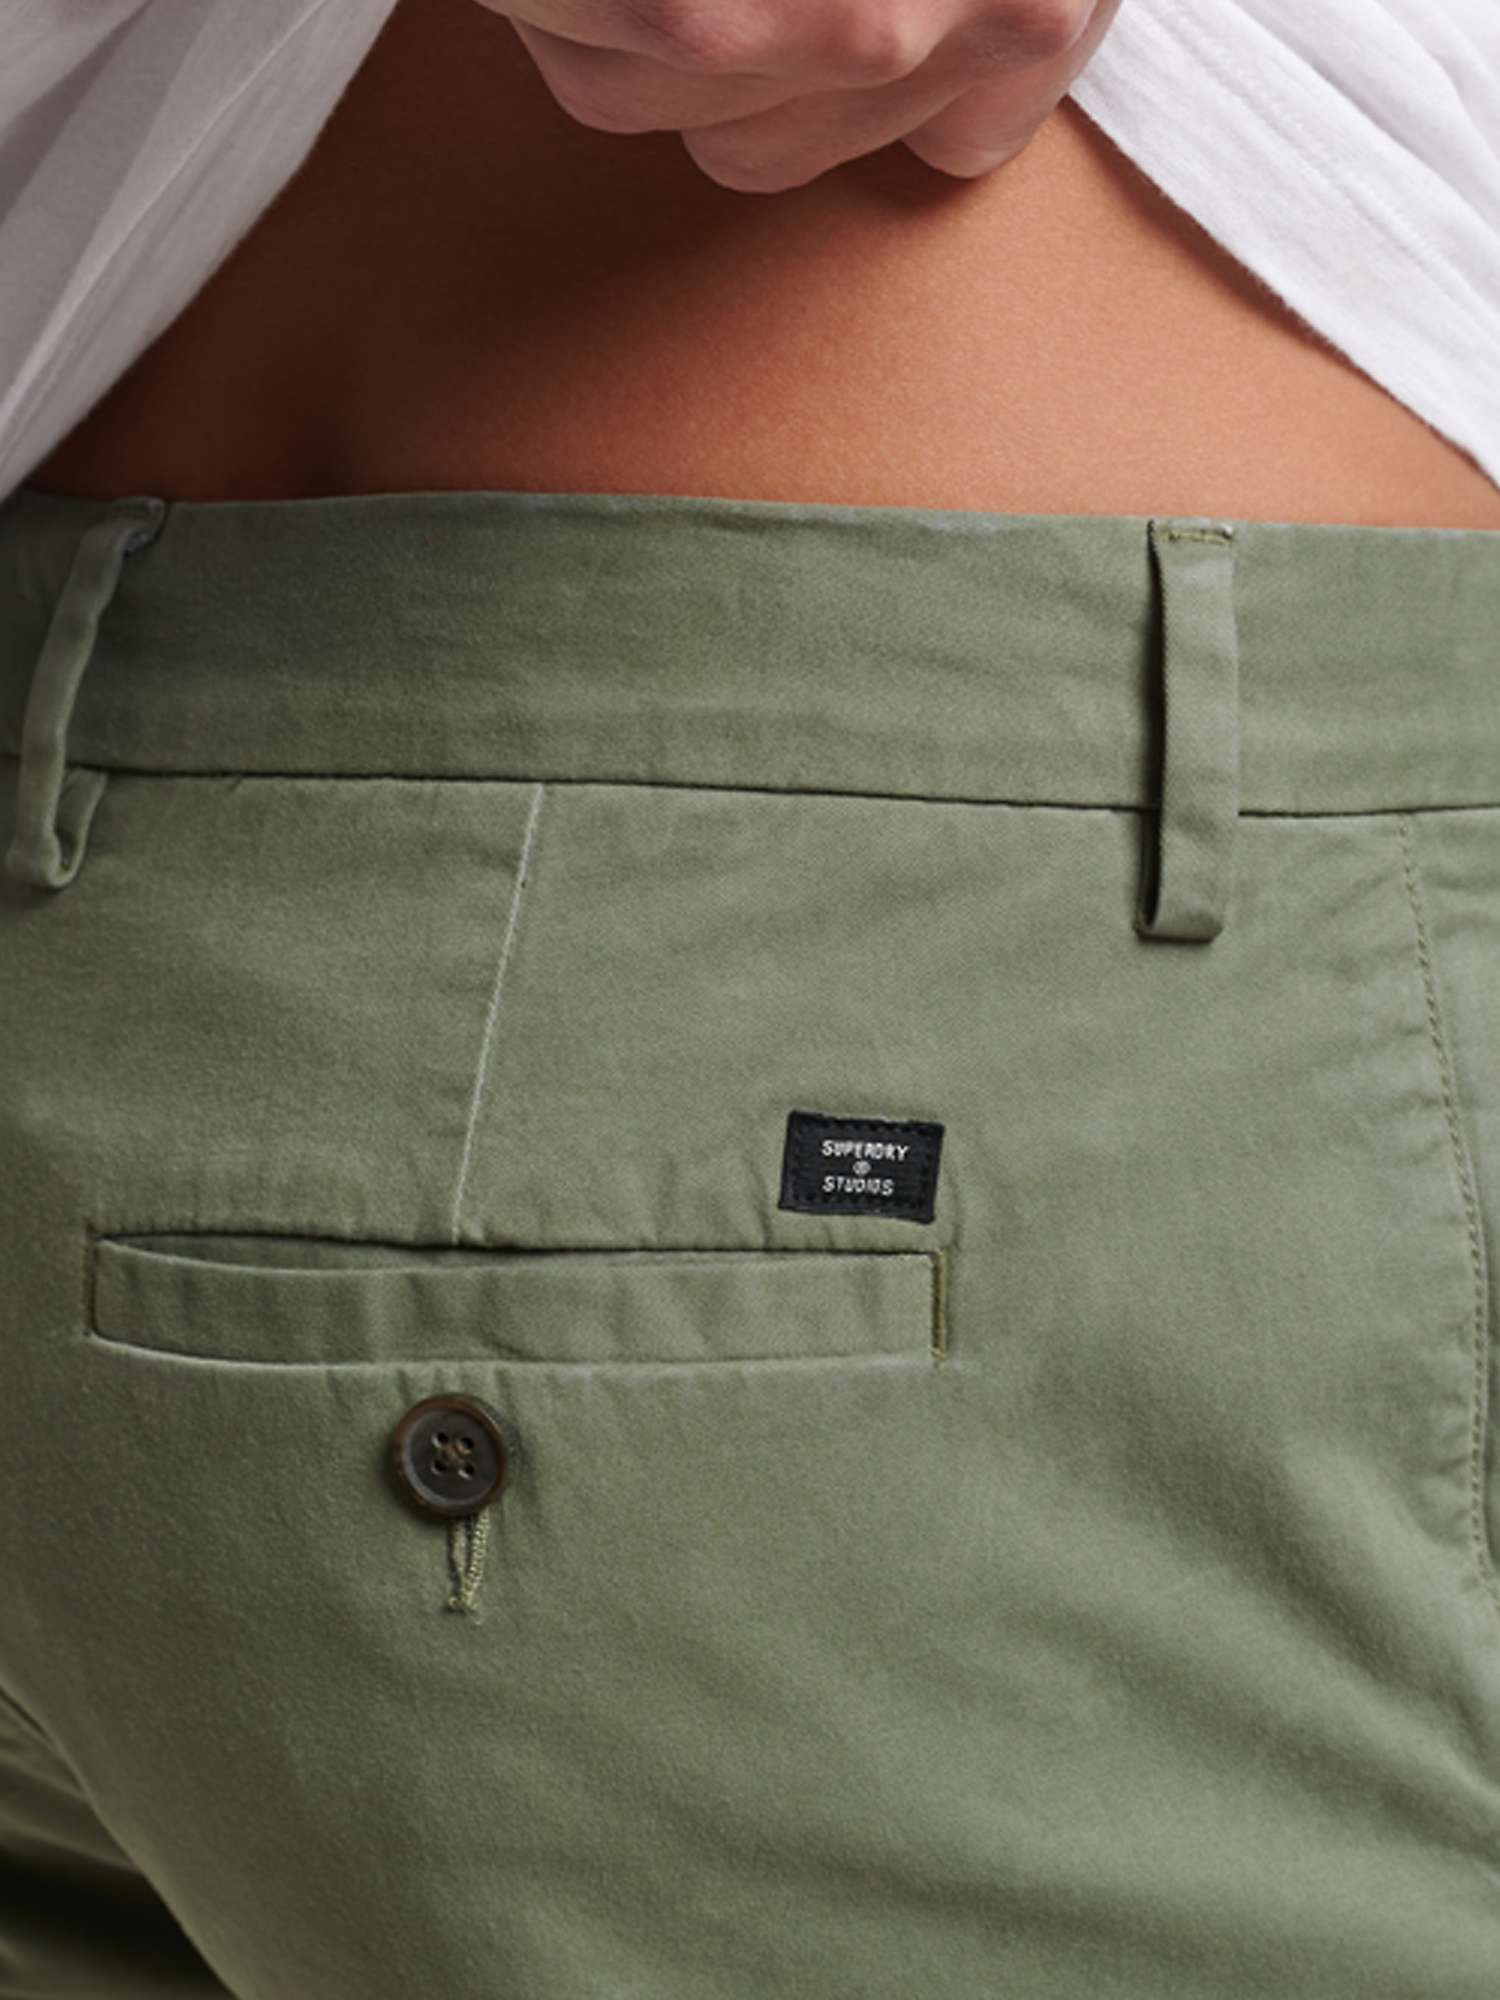 Buy Superdry Core Chino Shorts Online at johnlewis.com